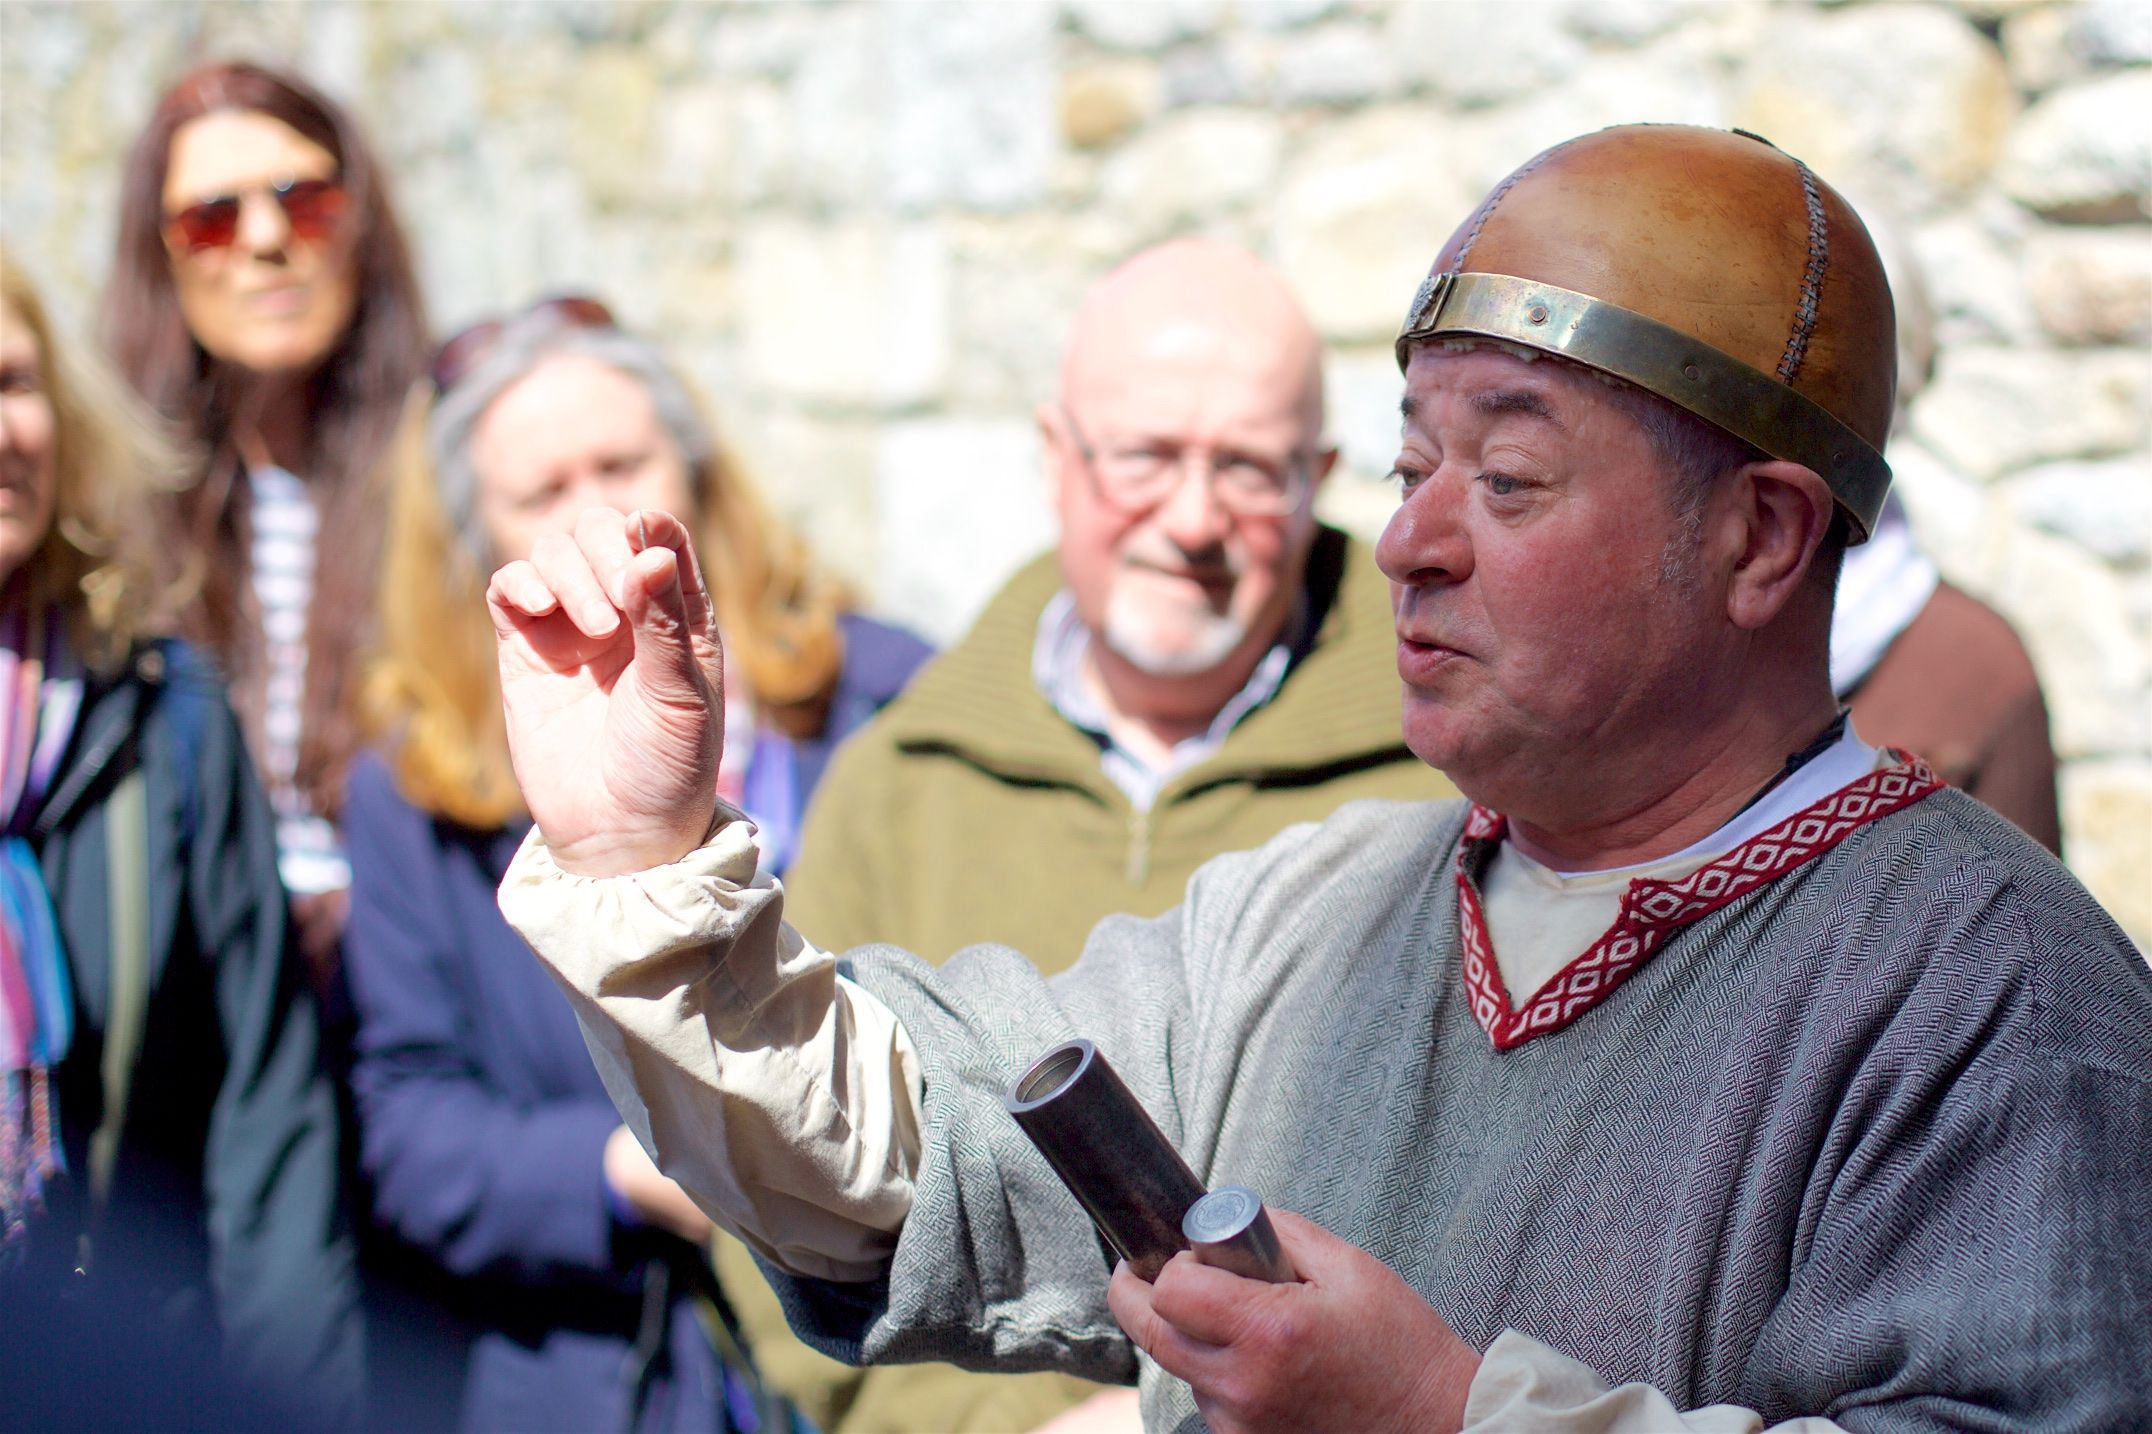 Viking coin minter at Dalkey Castle heritage week events, Dublin, Ireland